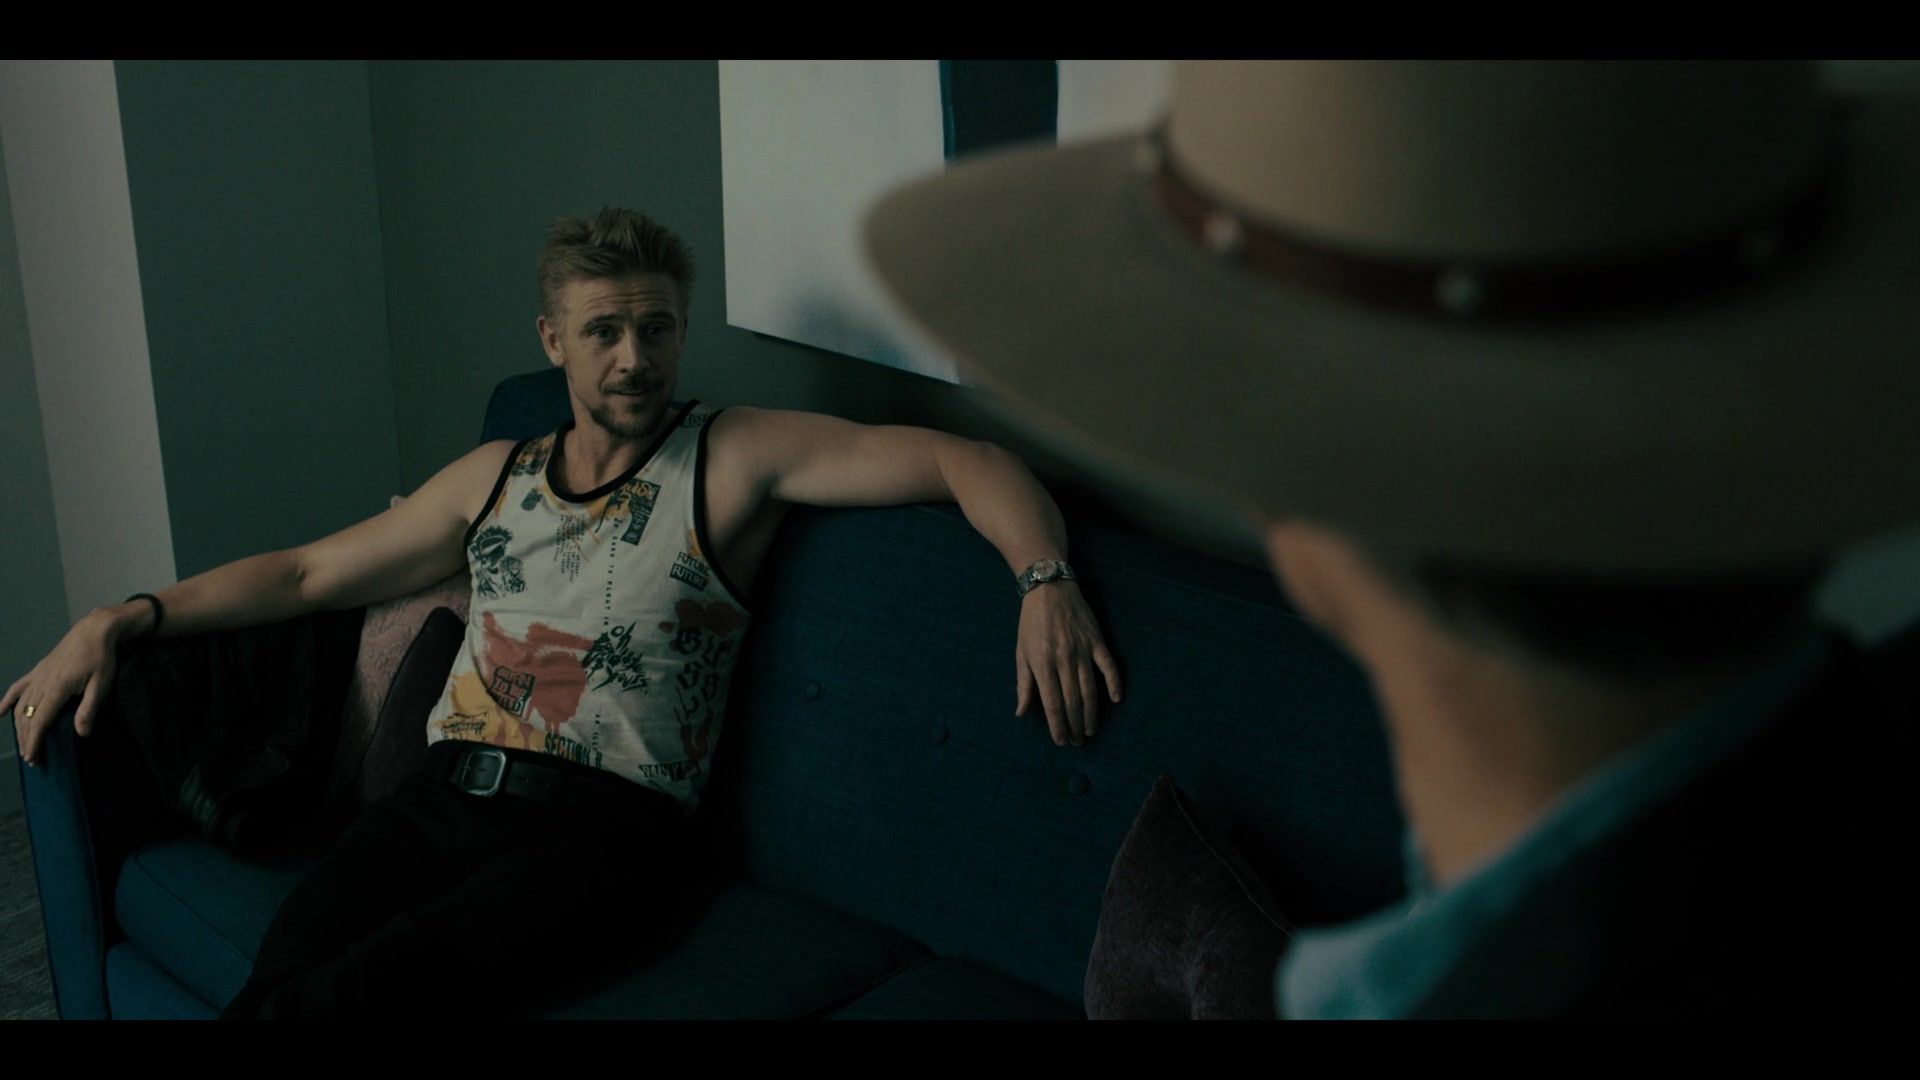 Worn on Justified: City Primeval TV Show - Tank Top Worn by Boyd Holbrook as Clement Mansel, aka The Oklahoma Wildman